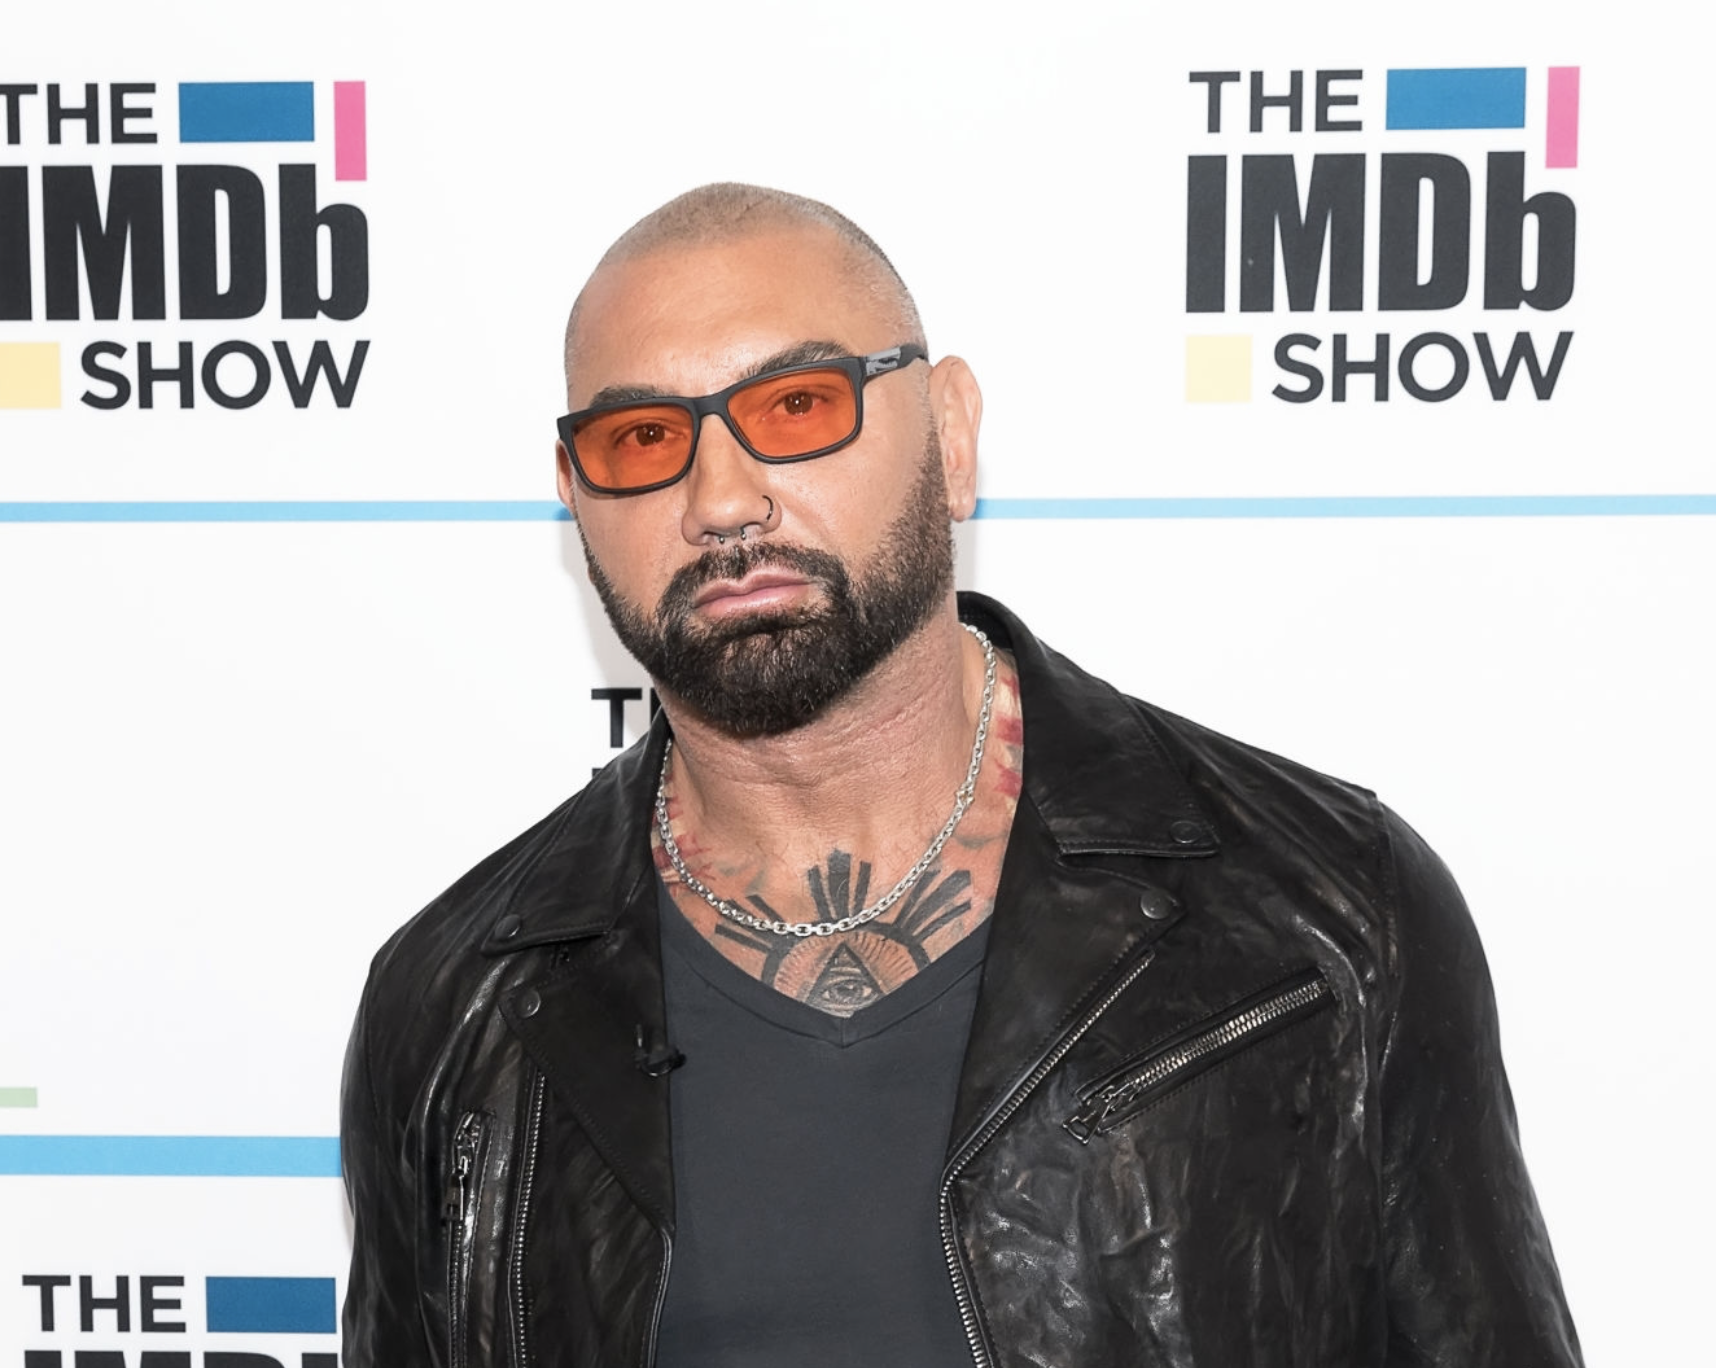 Why Dave Bautista Is Perfect For Bane (Will It Ever Happen?)